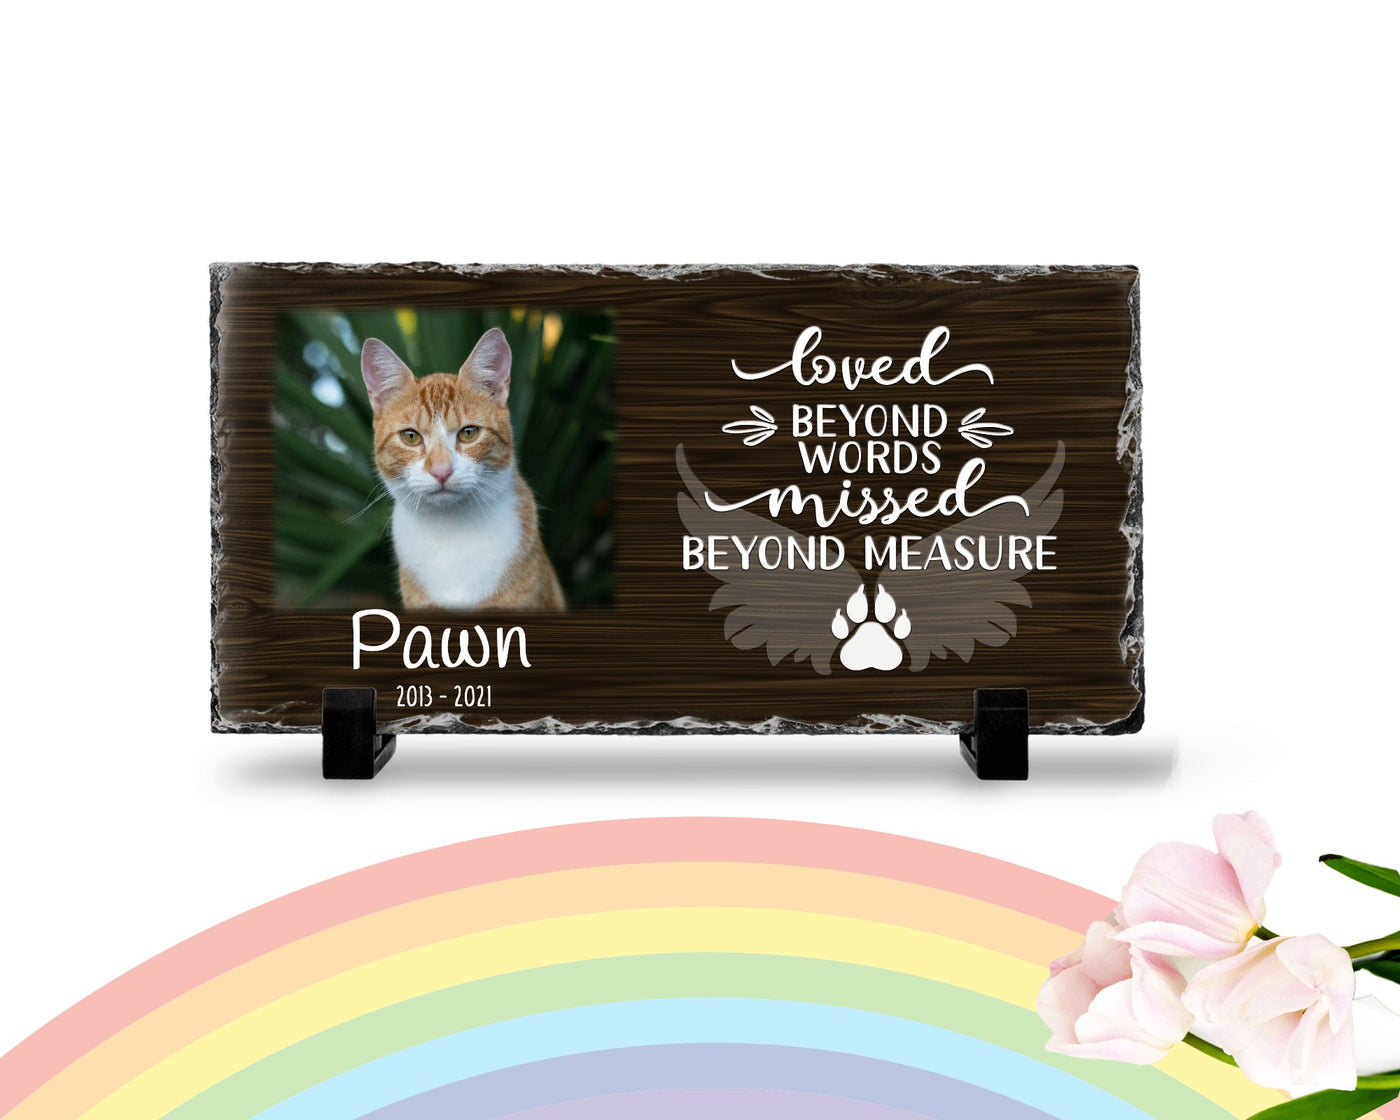 Personalized Personalized Cat Memorial Plaque Loved Beyond Words Missed Beyond Measure  Personalized Picture Keepsake Memorial Slates